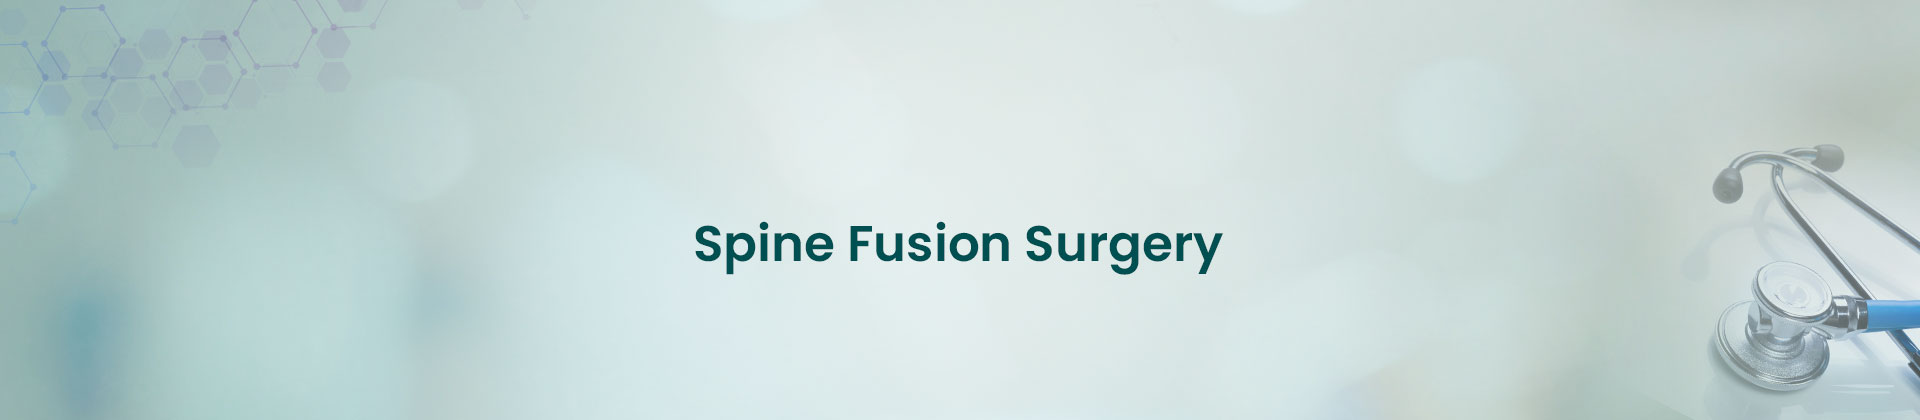 Spine Fusion Surgery